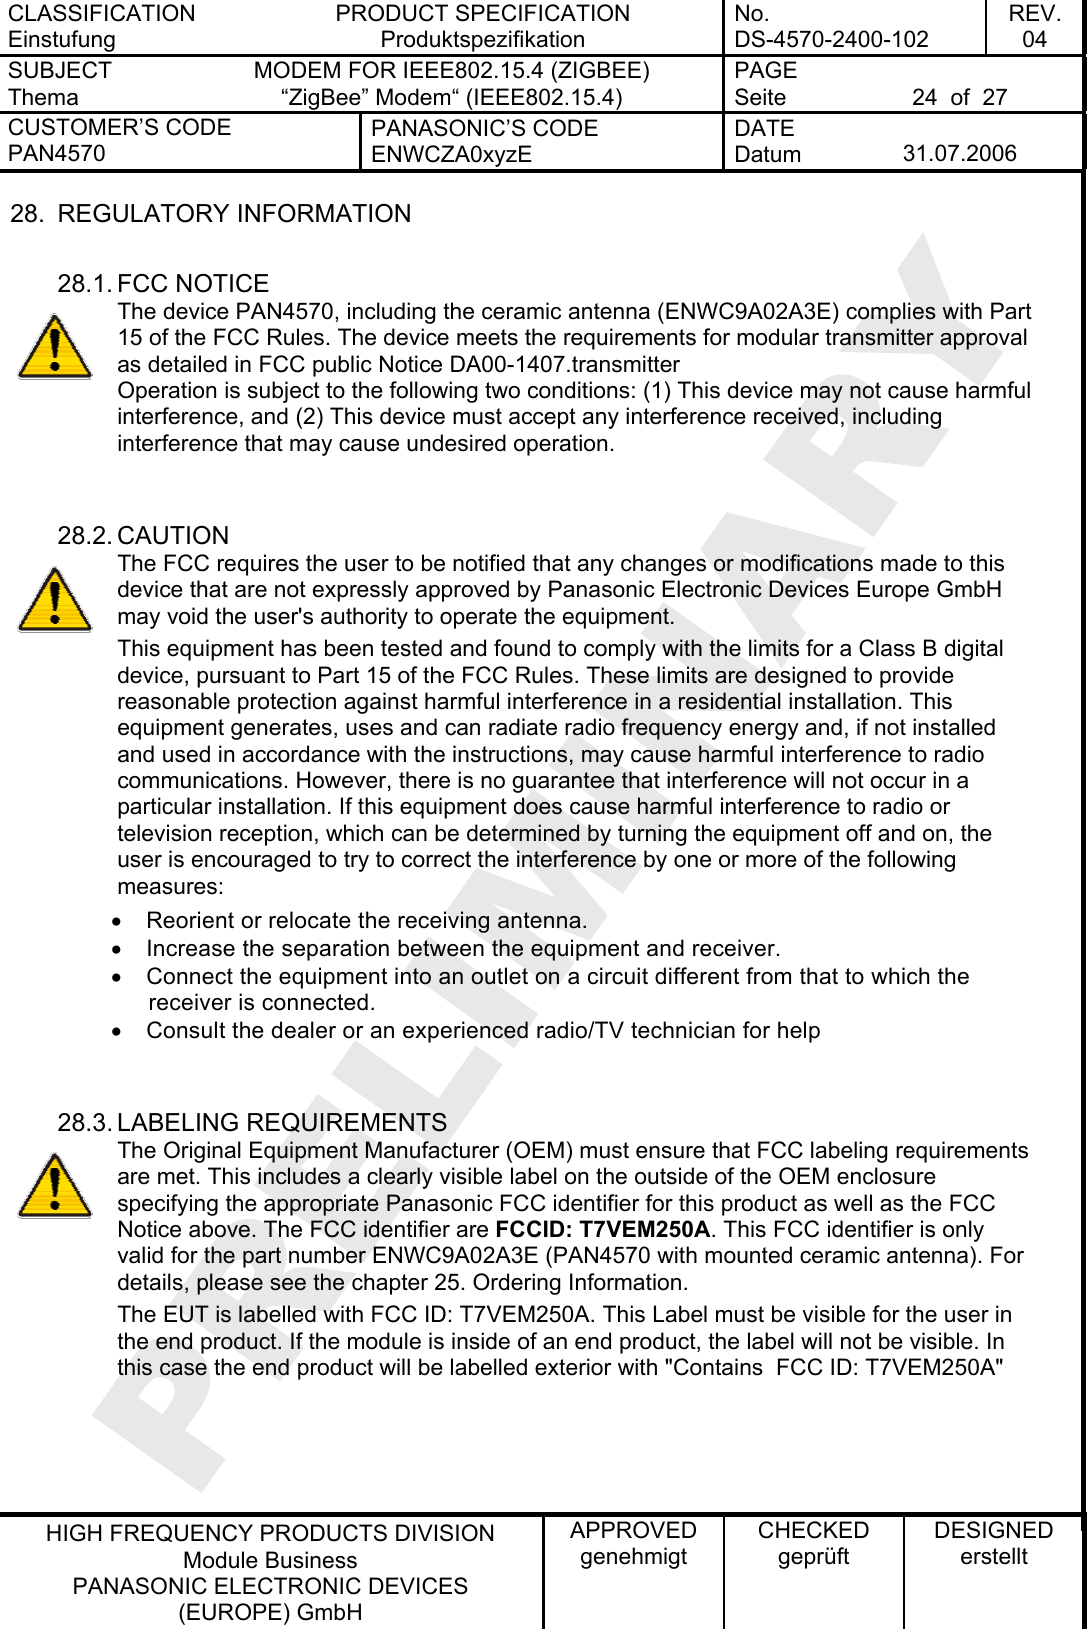 CLASSIFICATION Einstufung PRODUCT SPECIFICATION Produktspezifikation No. DS-4570-2400-102 REV. 04 SUBJECT Thema MODEM FOR IEEE802.15.4 (ZIGBEE) “ZigBee” Modem“ (IEEE802.15.4)   PAGE Seite  24  of  27 CUSTOMER’S CODE PAN4570 PANASONIC’S CODE ENWCZA0xyzE DATE Datum  31.07.2006   HIGH FREQUENCY PRODUCTS DIVISION Module Business PANASONIC ELECTRONIC DEVICES  (EUROPE) GmbH APPROVED genehmigt CHECKED geprüft DESIGNED erstellt 28. REGULATORY INFORMATION  28.1. FCC NOTICE The device PAN4570, including the ceramic antenna (ENWC9A02A3E) complies with Part 15 of the FCC Rules. The device meets the requirements for modular transmitter approval as detailed in FCC public Notice DA00-1407.transmitter  Operation is subject to the following two conditions: (1) This device may not cause harmful interference, and (2) This device must accept any interference received, including interference that may cause undesired operation.   28.2. CAUTION The FCC requires the user to be notified that any changes or modifications made to this device that are not expressly approved by Panasonic Electronic Devices Europe GmbH may void the user&apos;s authority to operate the equipment. This equipment has been tested and found to comply with the limits for a Class B digital device, pursuant to Part 15 of the FCC Rules. These limits are designed to provide reasonable protection against harmful interference in a residential installation. This equipment generates, uses and can radiate radio frequency energy and, if not installed and used in accordance with the instructions, may cause harmful interference to radio communications. However, there is no guarantee that interference will not occur in a particular installation. If this equipment does cause harmful interference to radio or television reception, which can be determined by turning the equipment off and on, the user is encouraged to try to correct the interference by one or more of the following measures: •  Reorient or relocate the receiving antenna. •  Increase the separation between the equipment and receiver. •  Connect the equipment into an outlet on a circuit different from that to which the receiver is connected. •  Consult the dealer or an experienced radio/TV technician for help   28.3. LABELING REQUIREMENTS The Original Equipment Manufacturer (OEM) must ensure that FCC labeling requirements are met. This includes a clearly visible label on the outside of the OEM enclosure specifying the appropriate Panasonic FCC identifier for this product as well as the FCC Notice above. The FCC identifier are FCCID: T7VEM250A. This FCC identifier is only valid for the part number ENWC9A02A3E (PAN4570 with mounted ceramic antenna). For details, please see the chapter 25. Ordering Information. The EUT is labelled with FCC ID: T7VEM250A. This Label must be visible for the user in the end product. If the module is inside of an end product, the label will not be visible. In this case the end product will be labelled exterior with &quot;Contains  FCC ID: T7VEM250A&quot;    